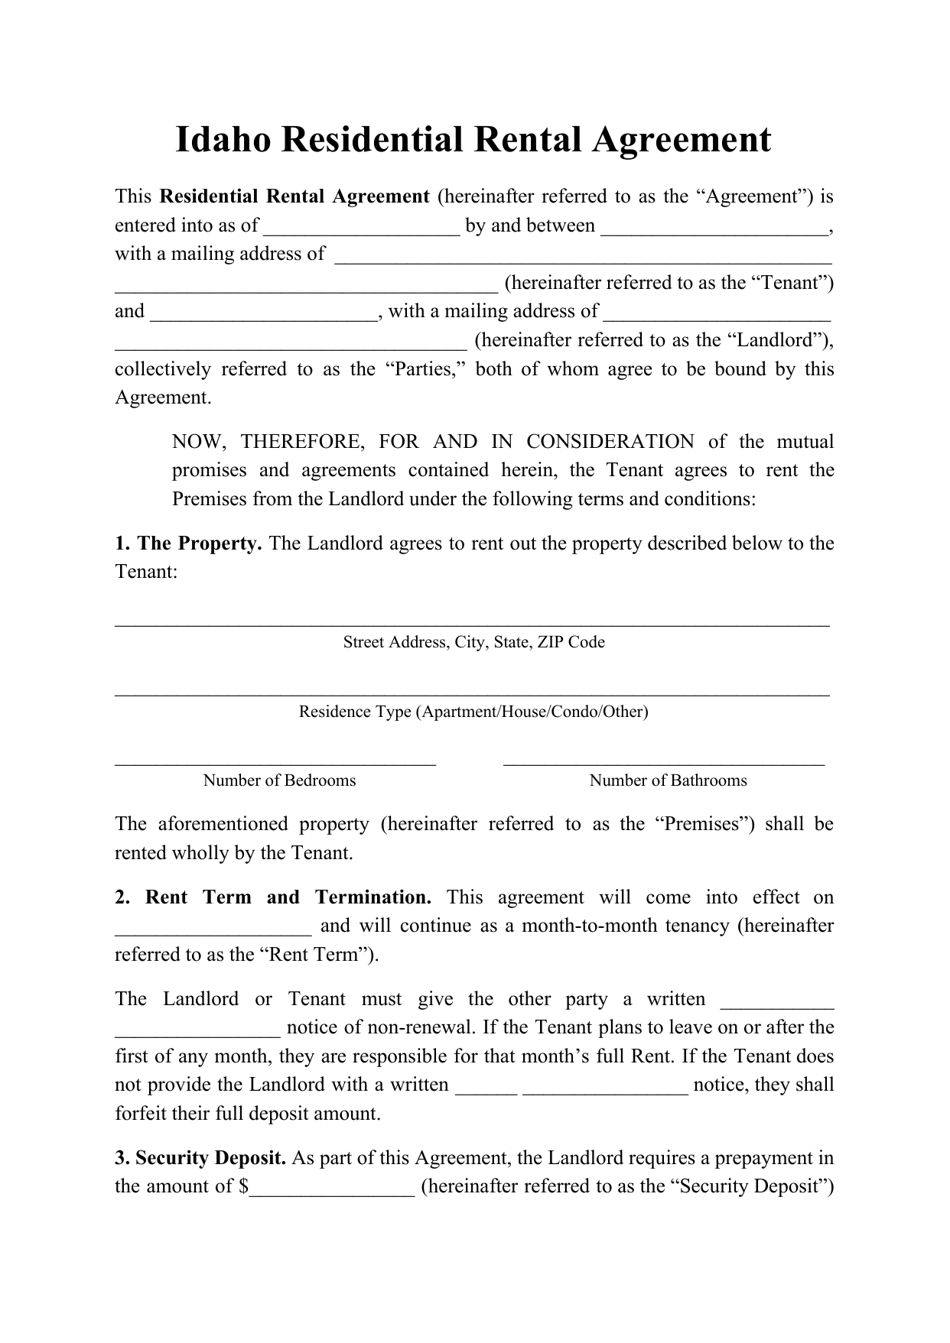 Residential Rental Agreement Template - Idaho, Page 1